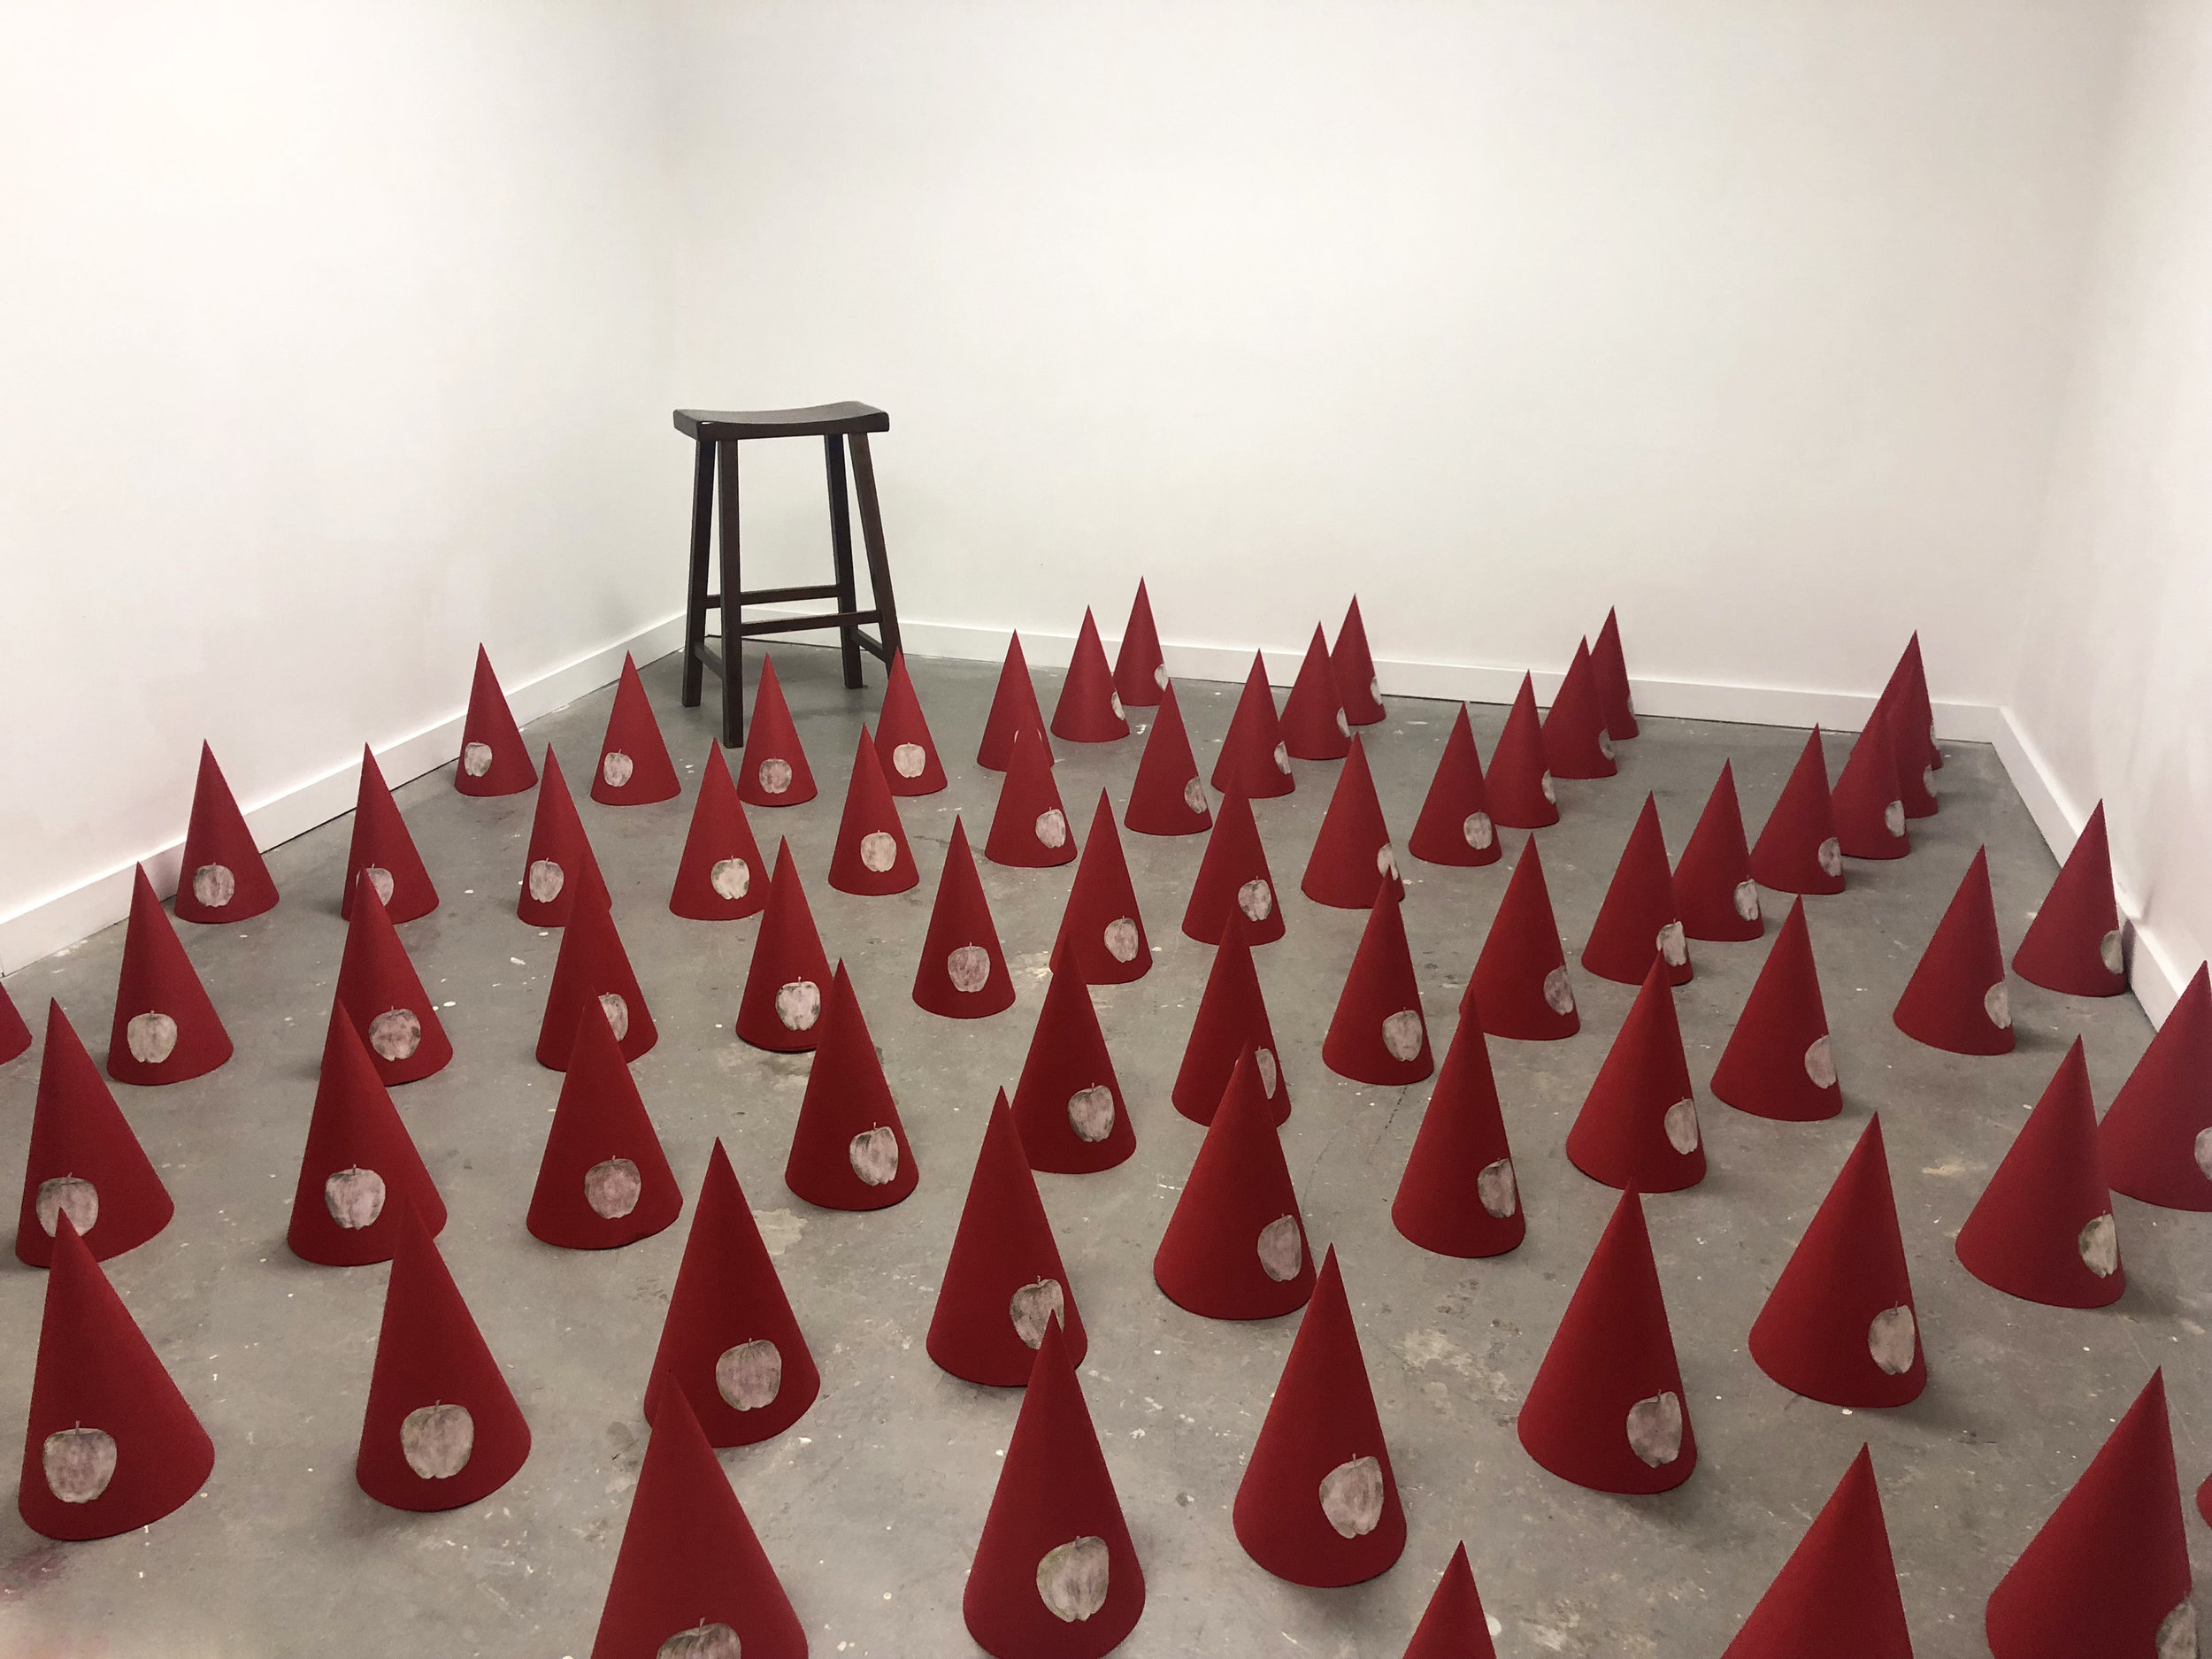  Student: Lu Colby Project: “Color Lithography” (Advanced Print: Lithography) Site-specific installation: Stone lithography, handmade dunce caps, found stool.  96”x96” 